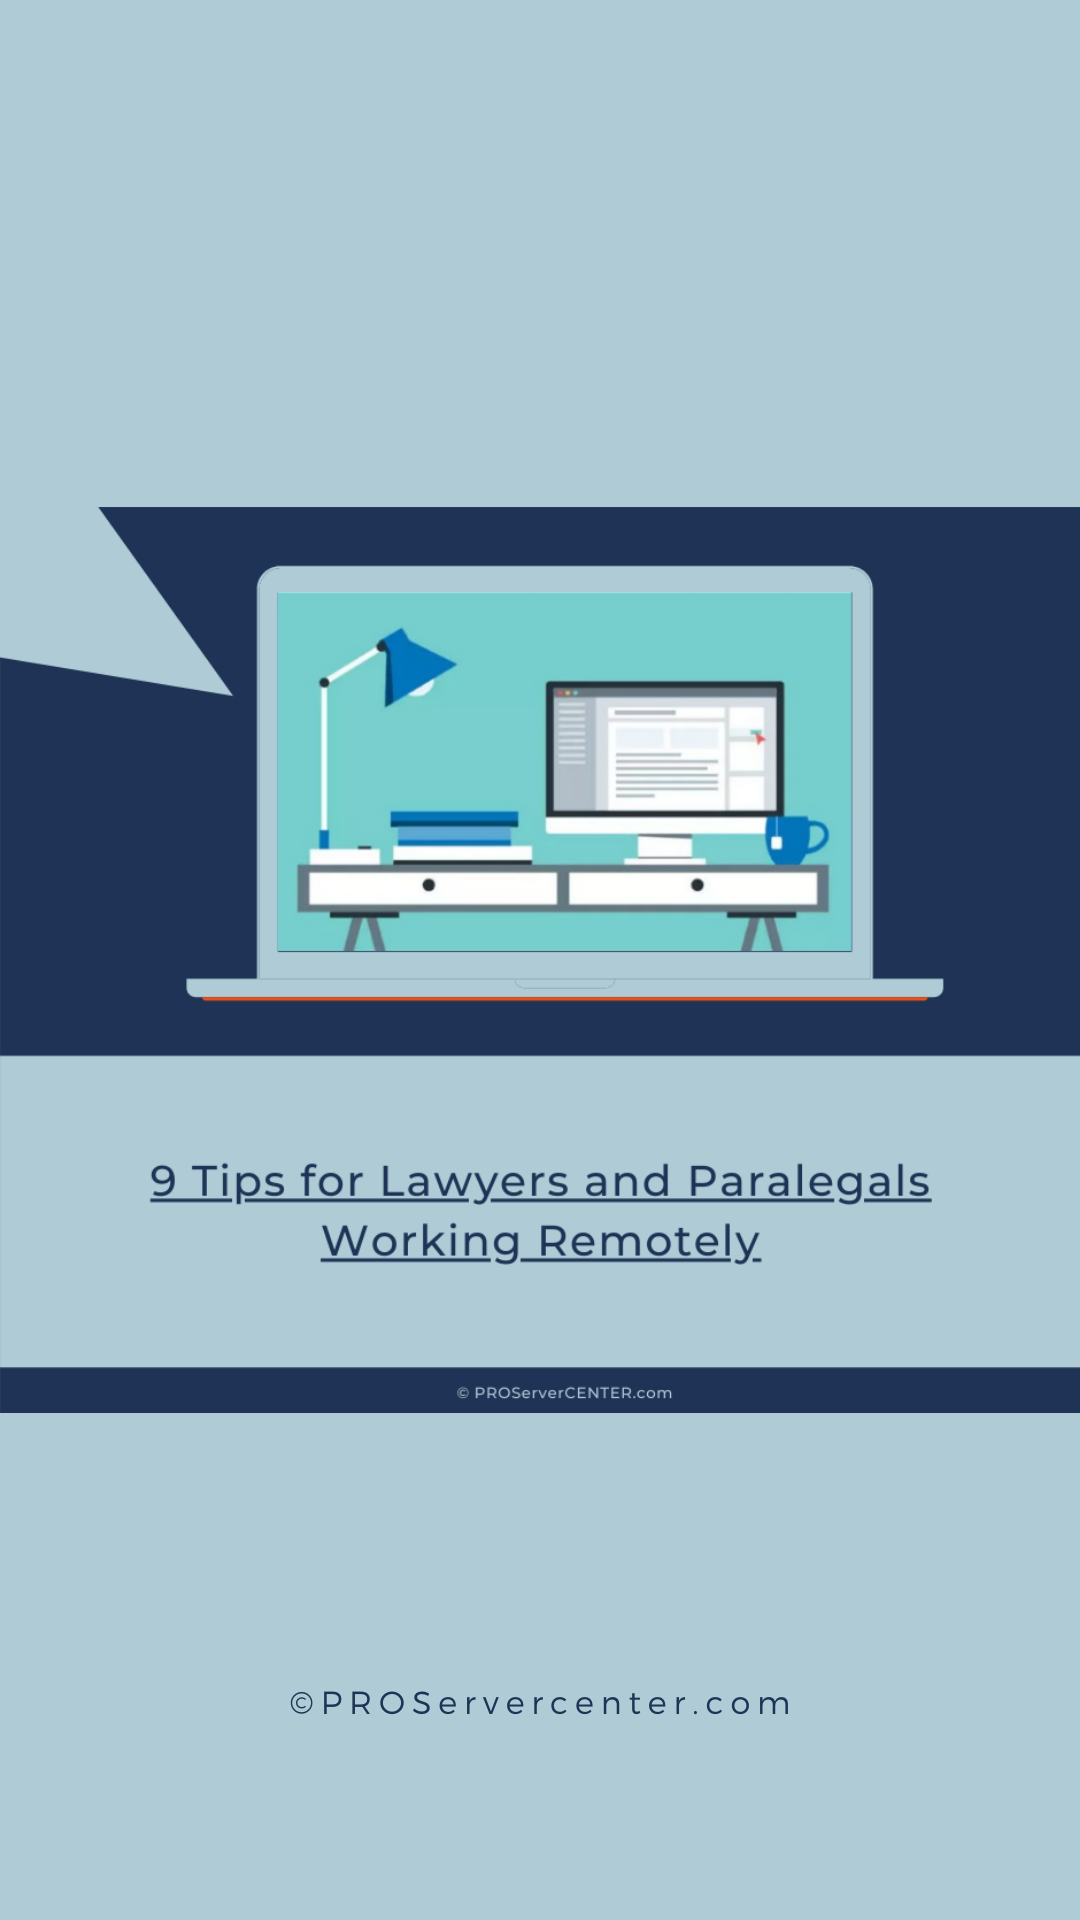 9 tips for legal professionals working remotely